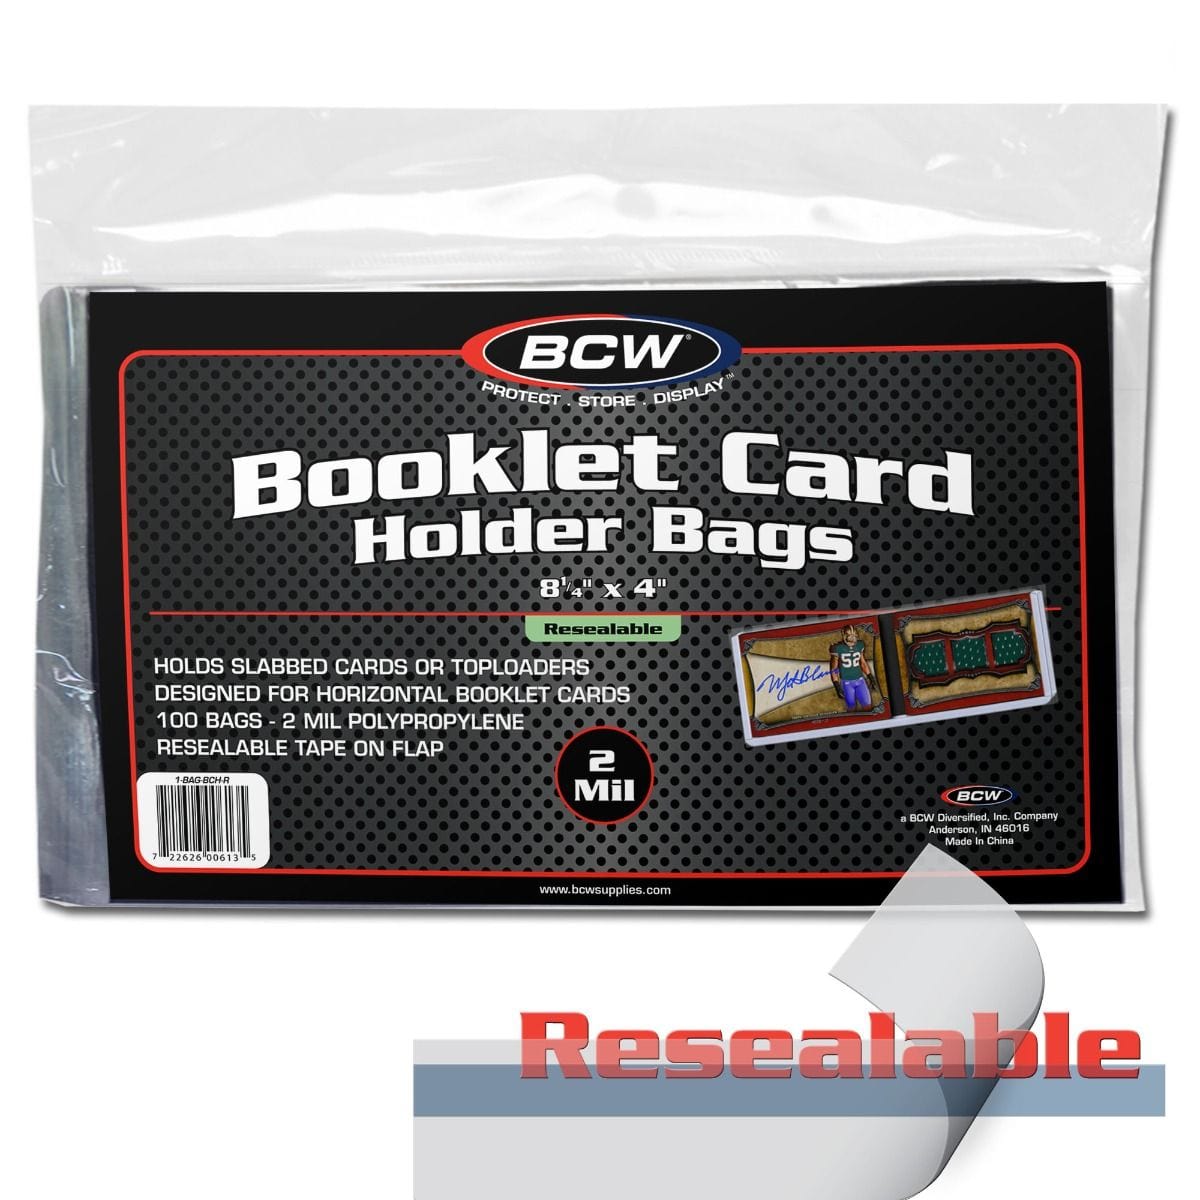 Resealable Bag for Booklet Card in Holder - Horizontal